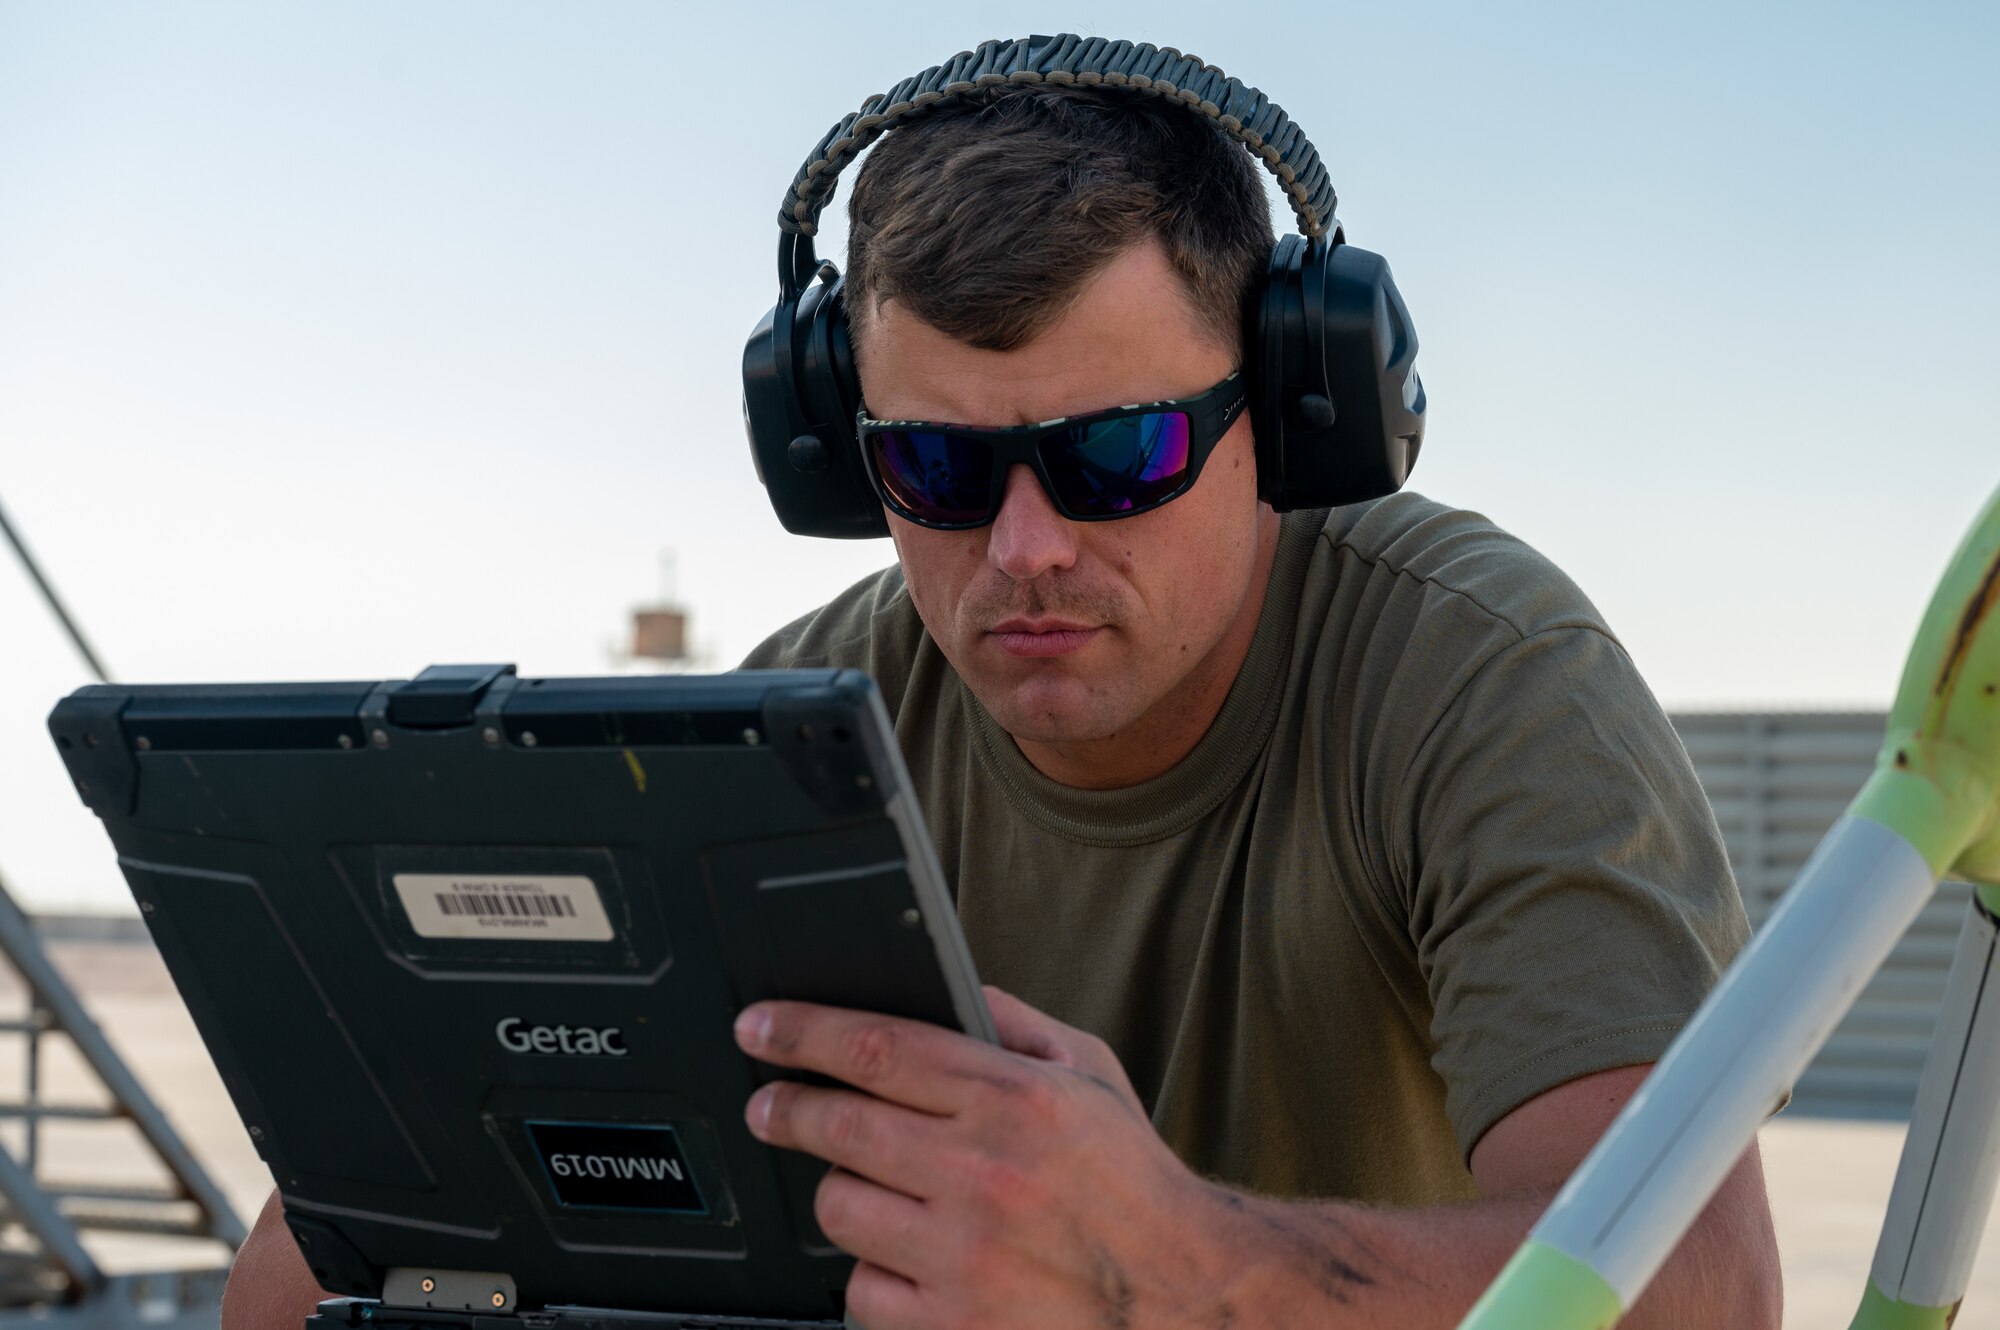 U.S. Air Force Tech. Sgt. Tommy James, 22nd Maintenance Squadron repair and restoration craftsman, uses a laptop during a preflight inspection Aug. 30, 2022, at Al Udeid Air Base, Qatar.